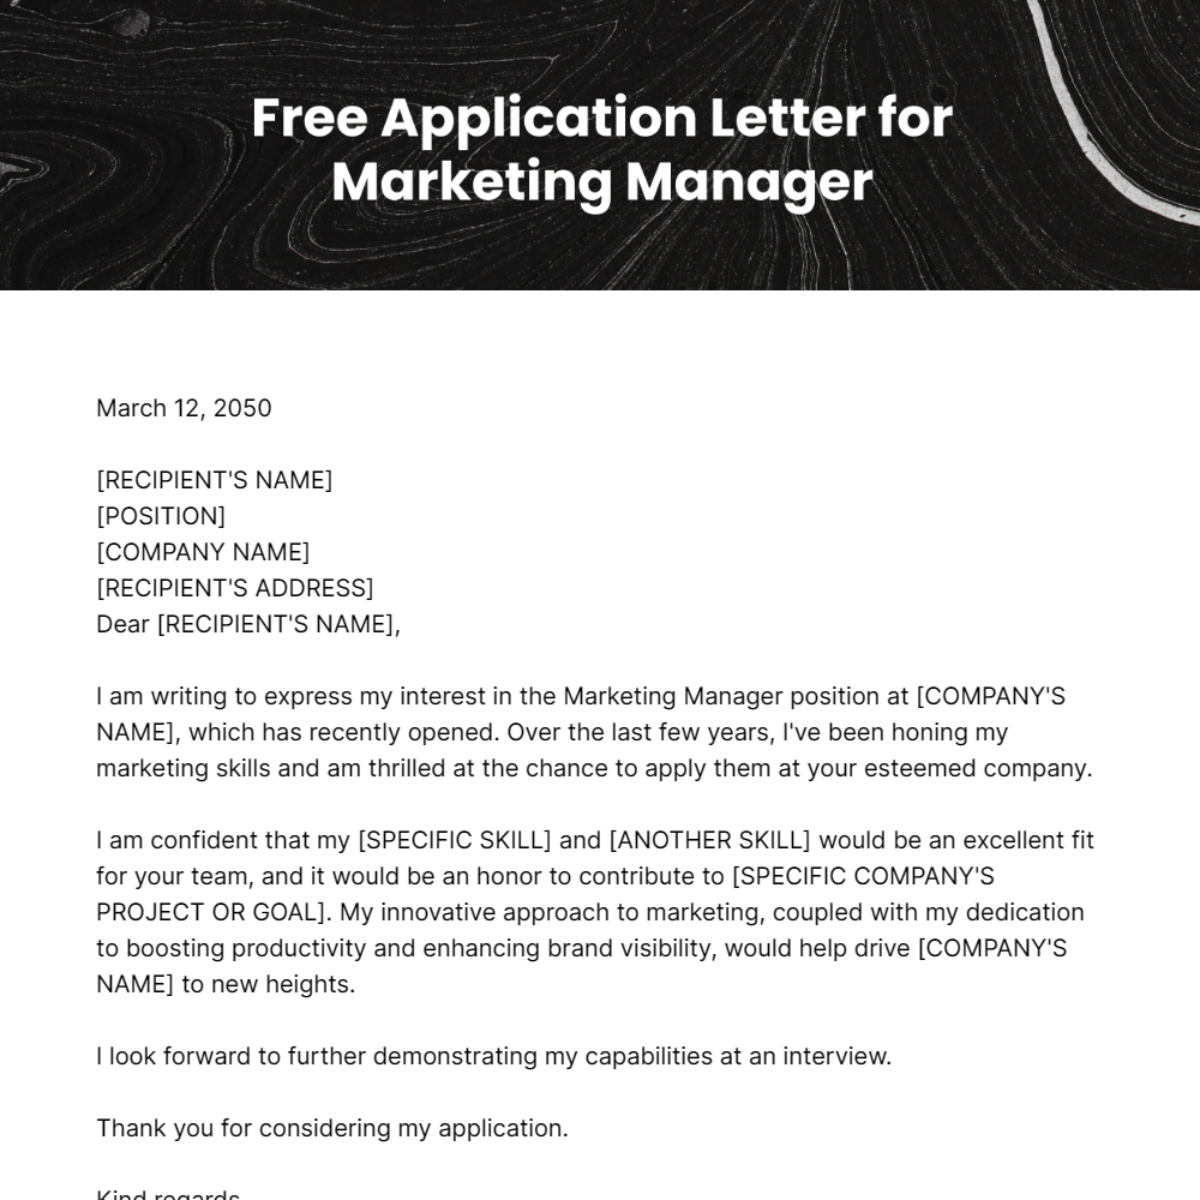 Application Letter for Marketing Manager Template